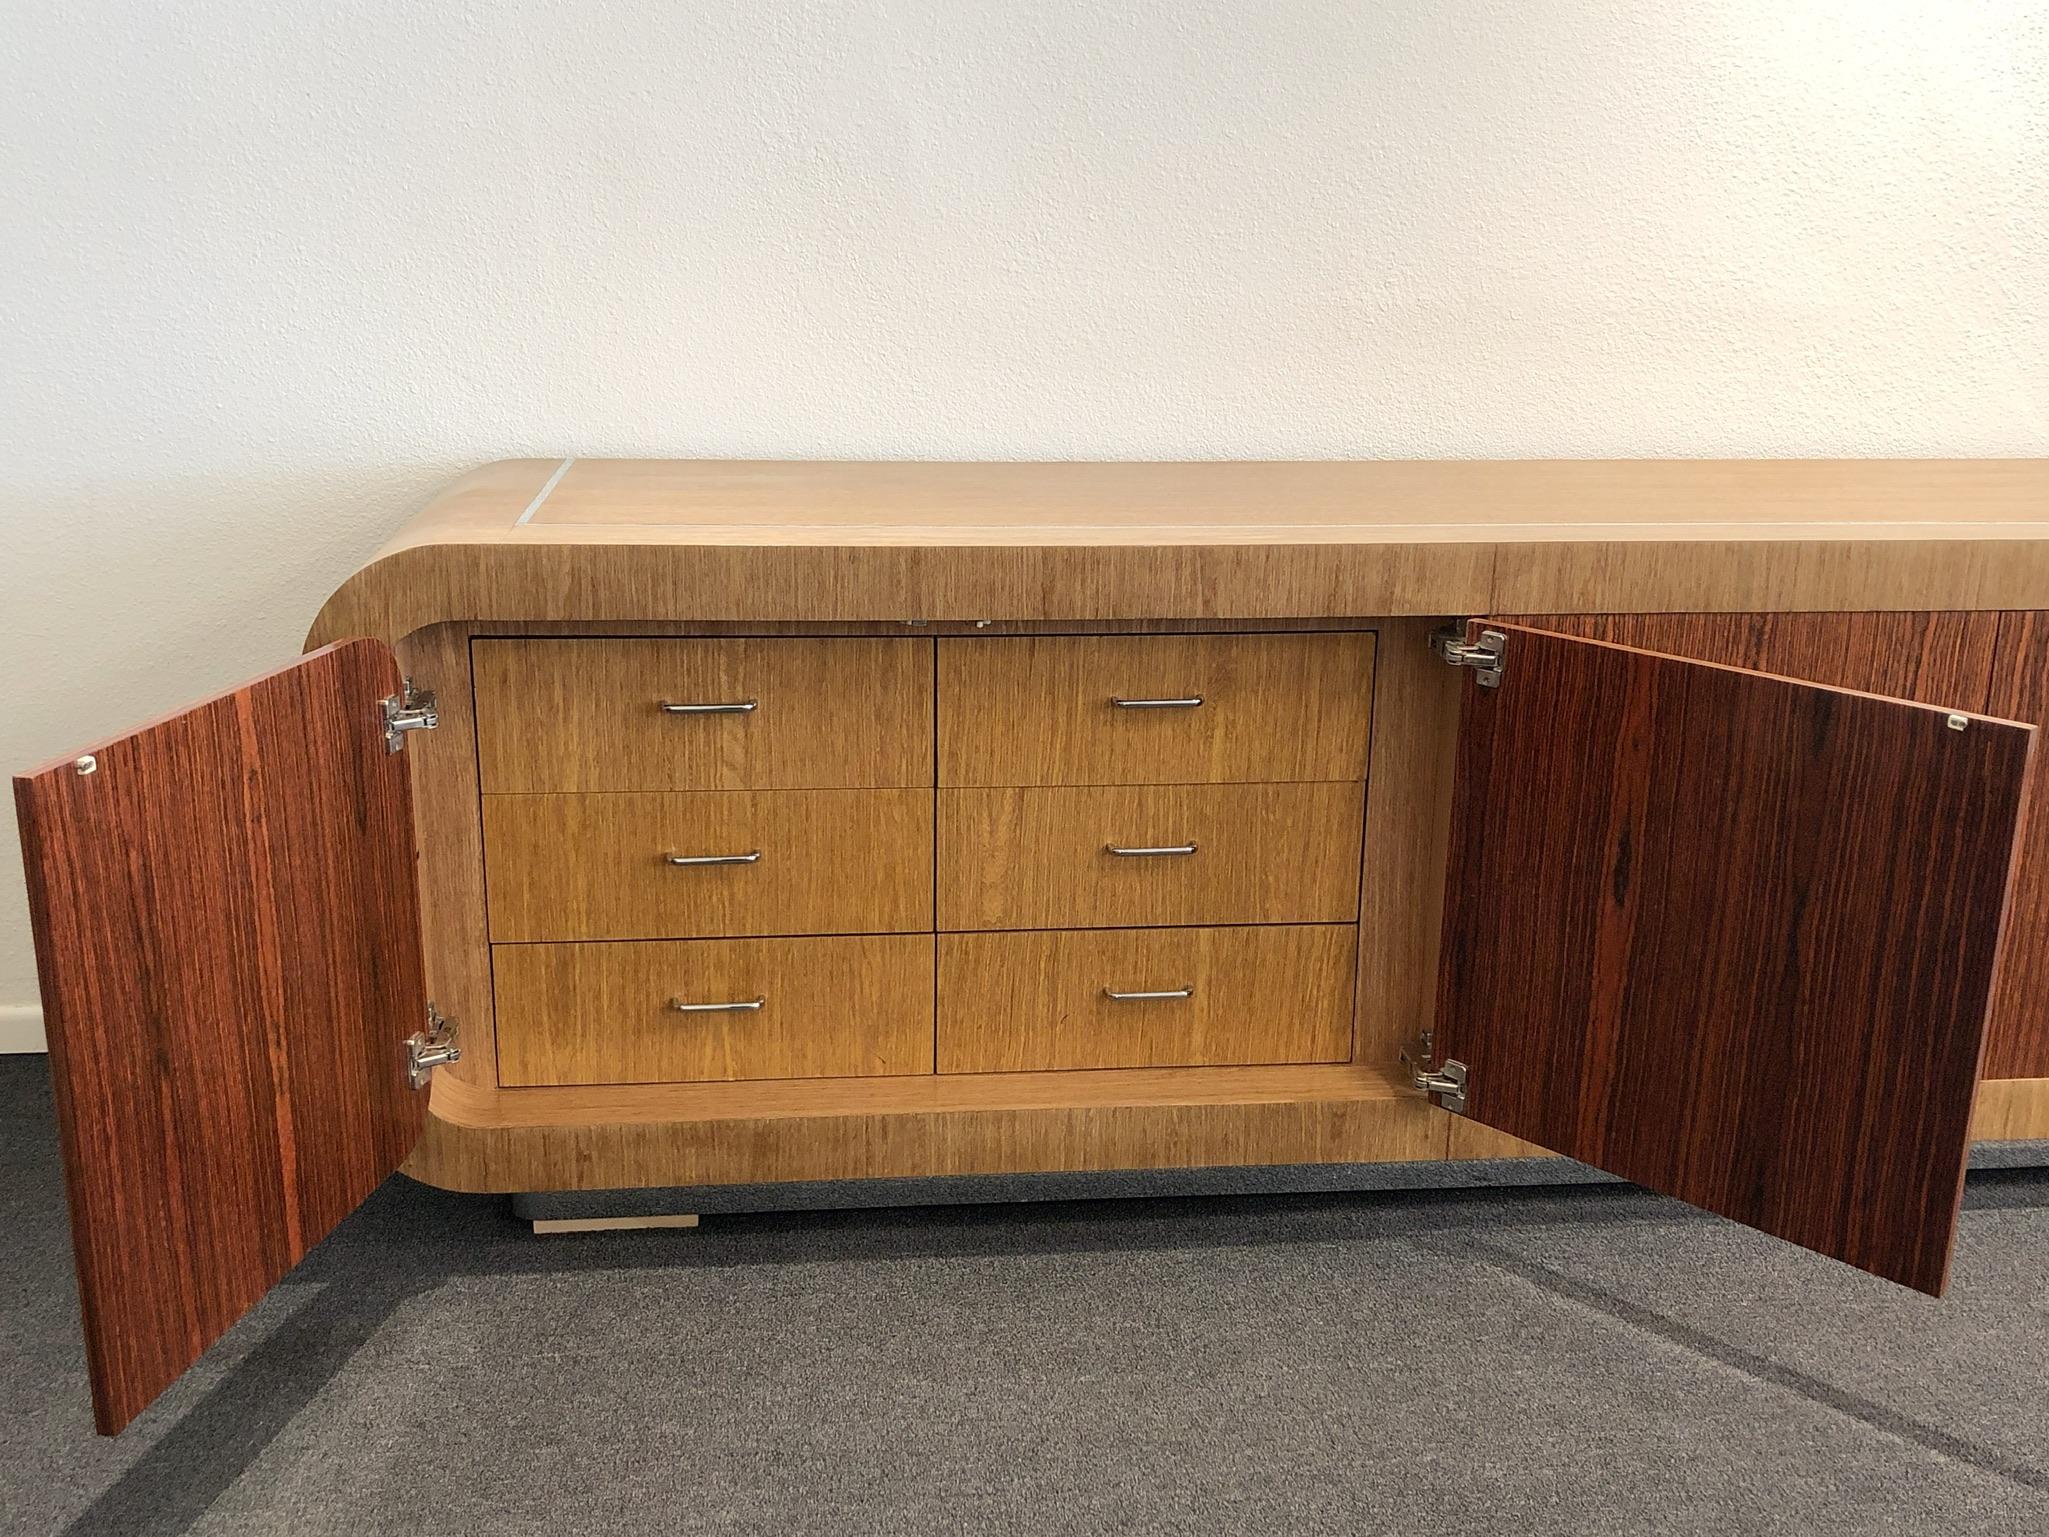 Polished Oak and Rosewood Credeza by Steve Chase